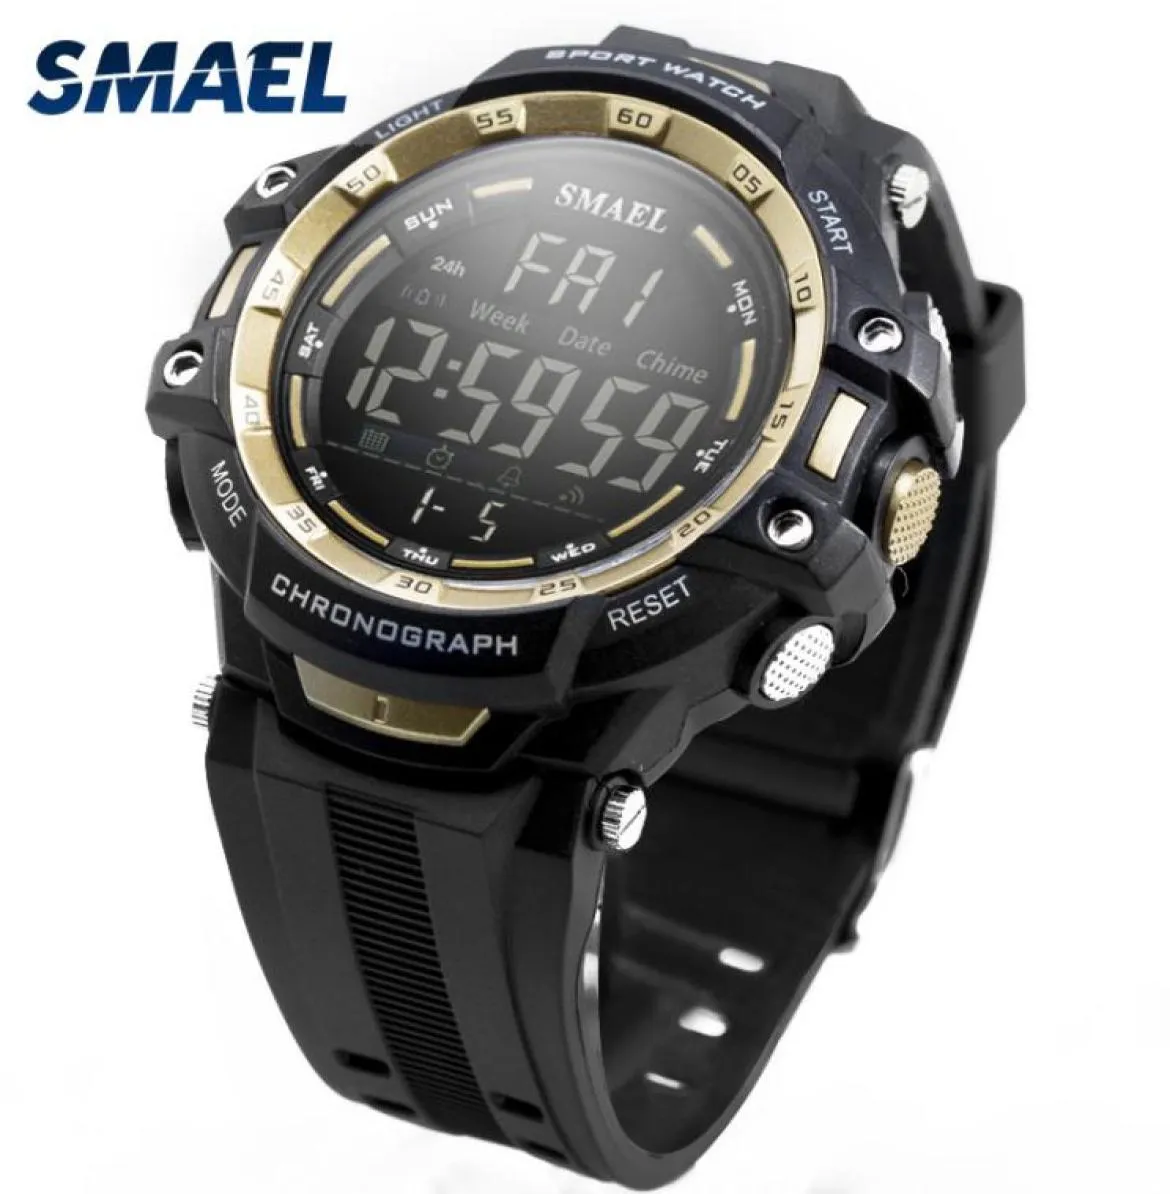 Men Watches Digital LED Light Smael Watch S Shock Montre Mens Military Watches Top Brand Luxury 1350 Digital Owatchs Sports3654197